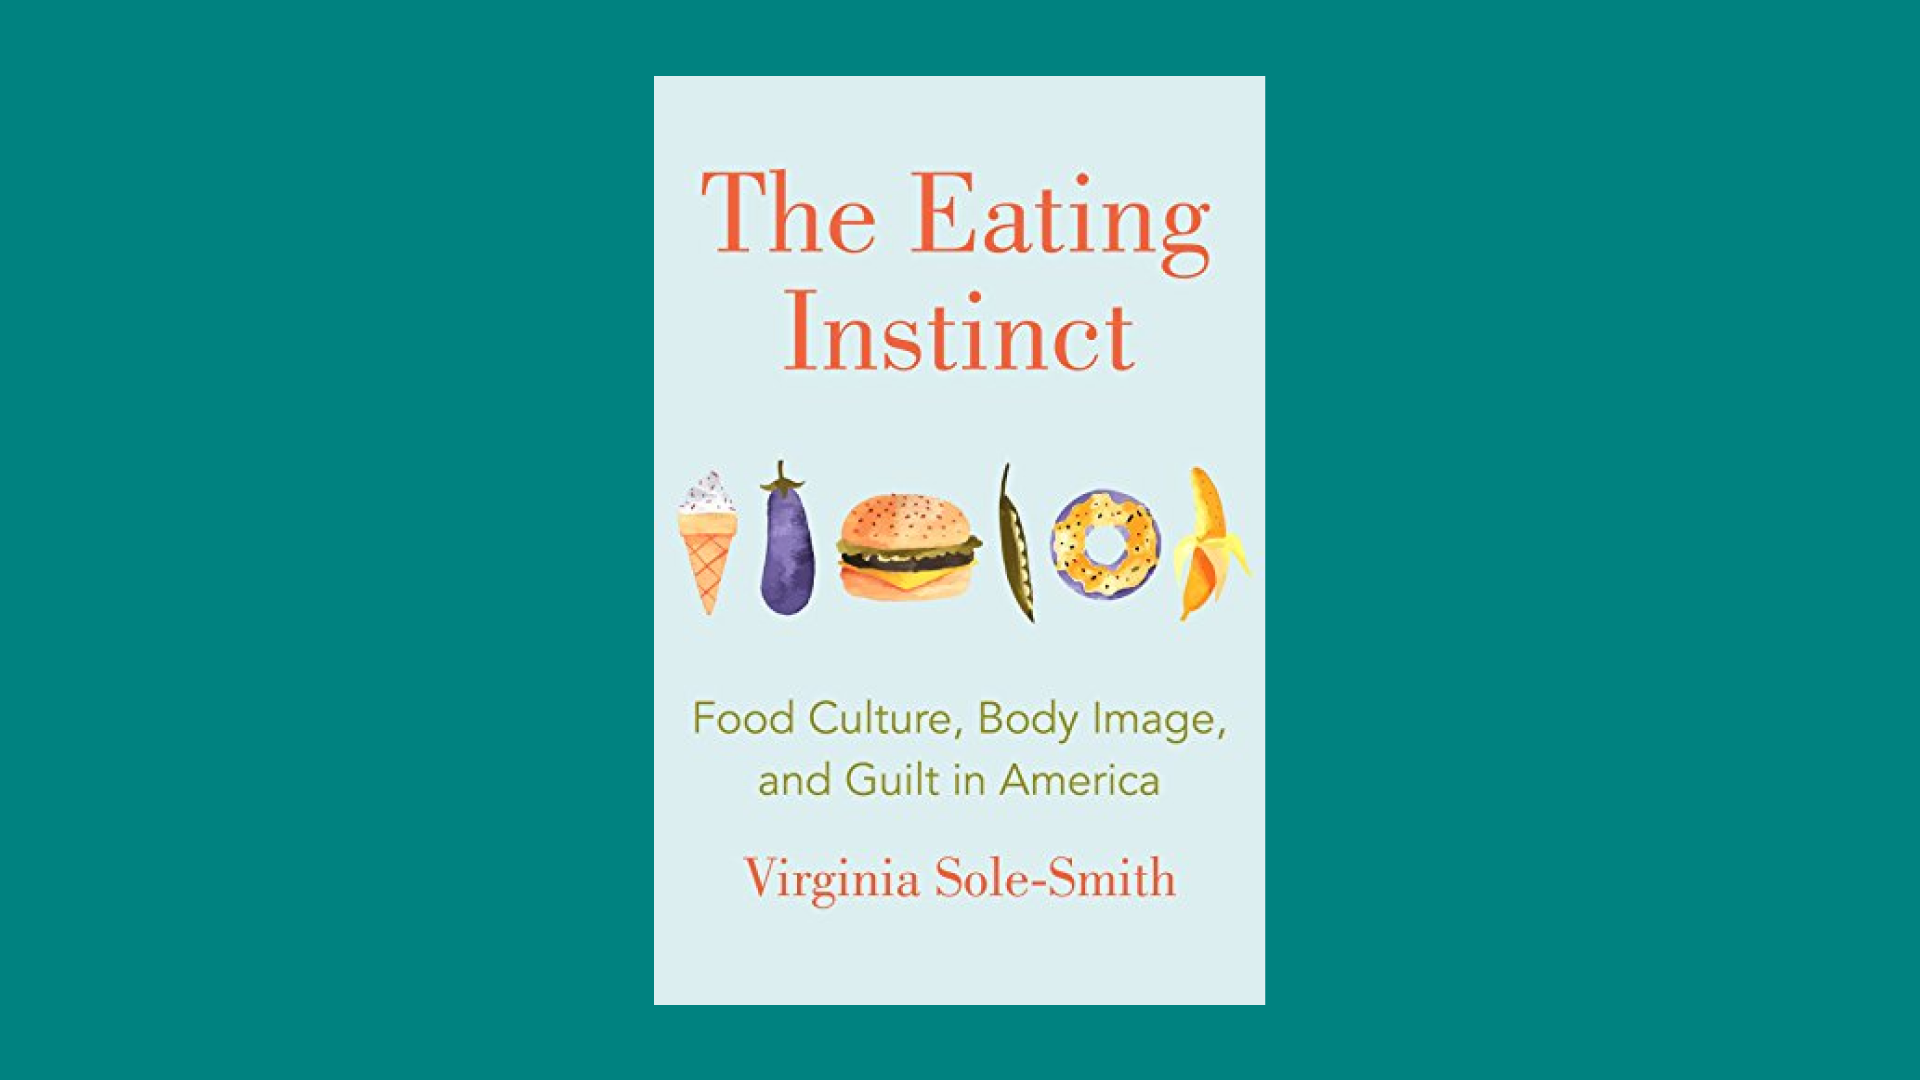 “The Eating Instinct: Food Culture, Body Image, and Guilt in America” by Virginia Sole-Smith